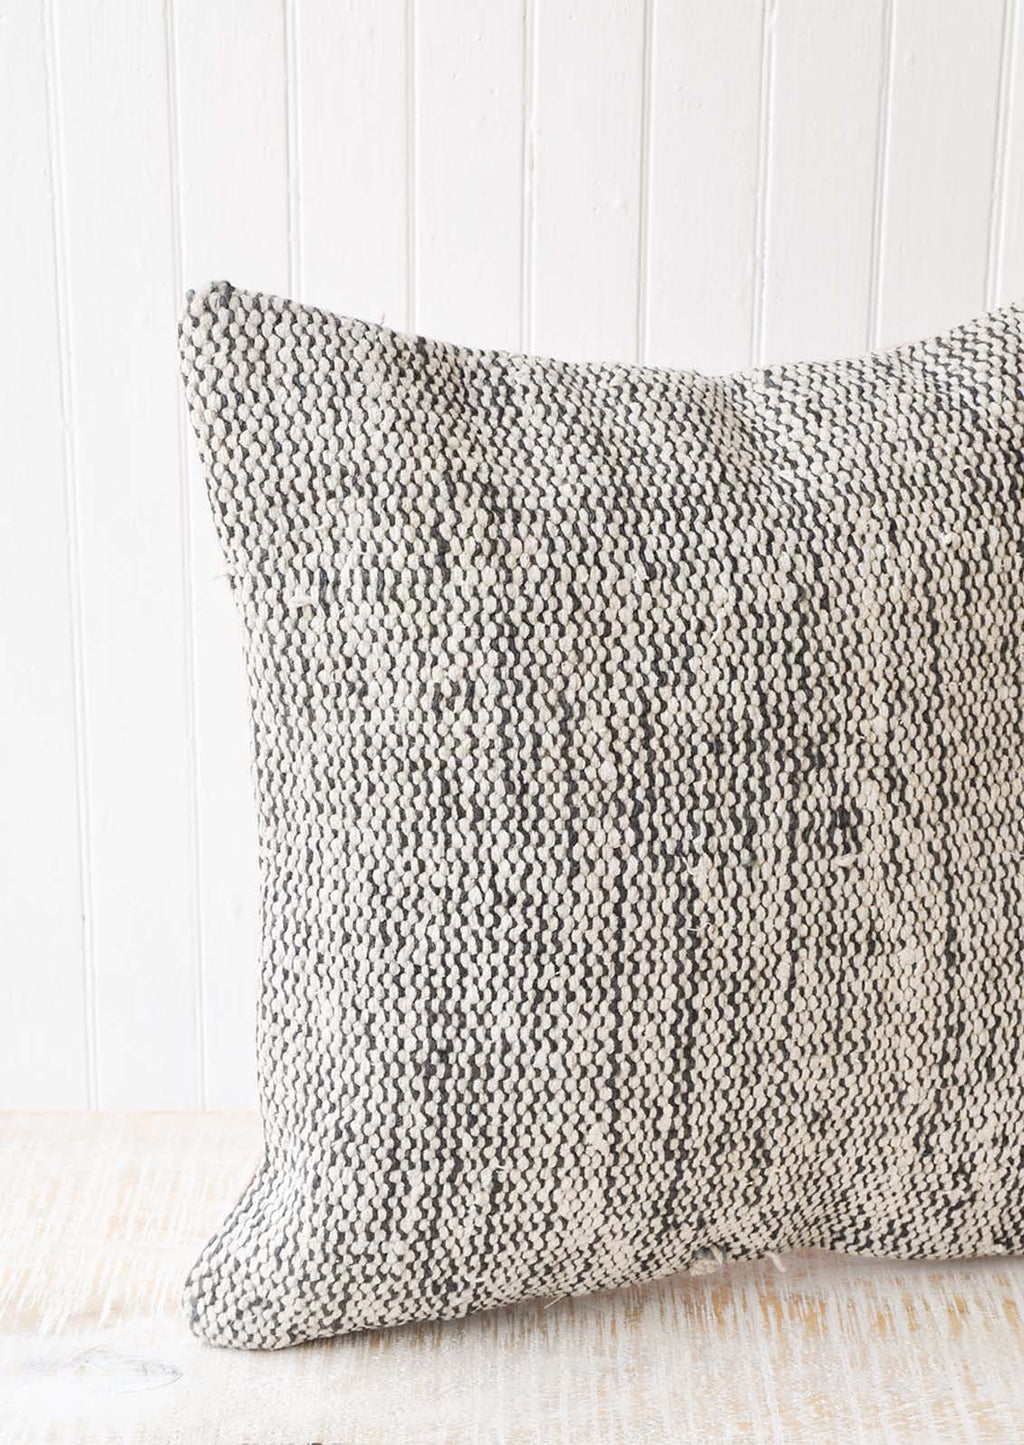 2: A black and white woven pillow with wavy lines.